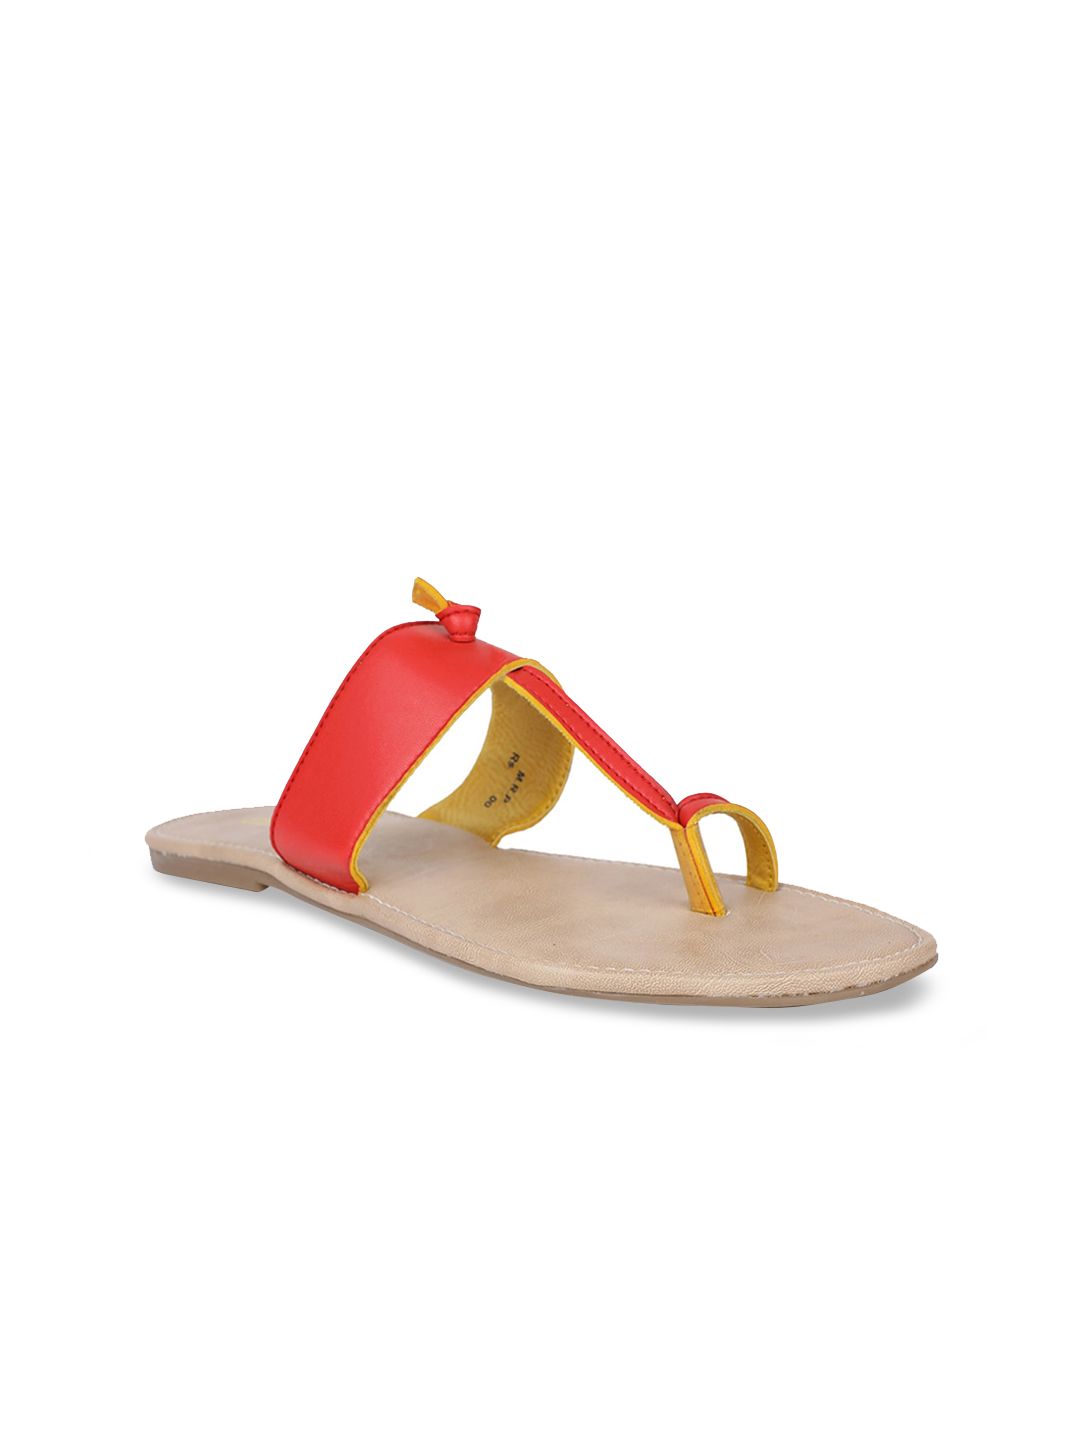 Bata Women Red Solid PU One Toe Flats Price in India